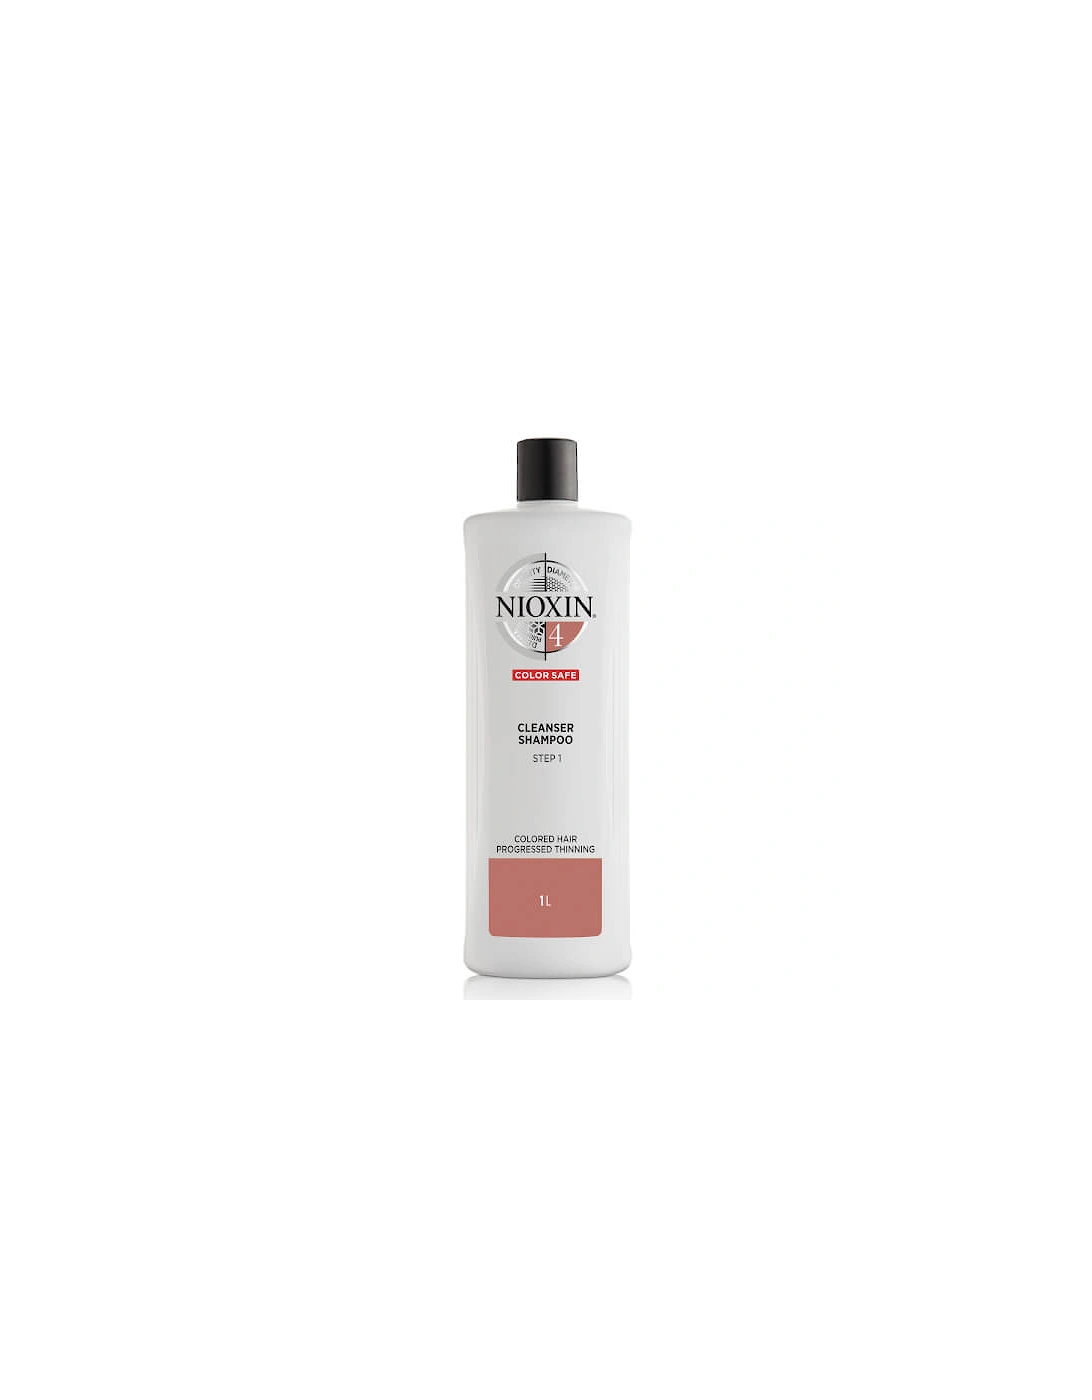 3-Part System 4 Cleanser Shampoo for Coloured Hair with Progressed Thinning 1000ml - NIOXIN, 2 of 1